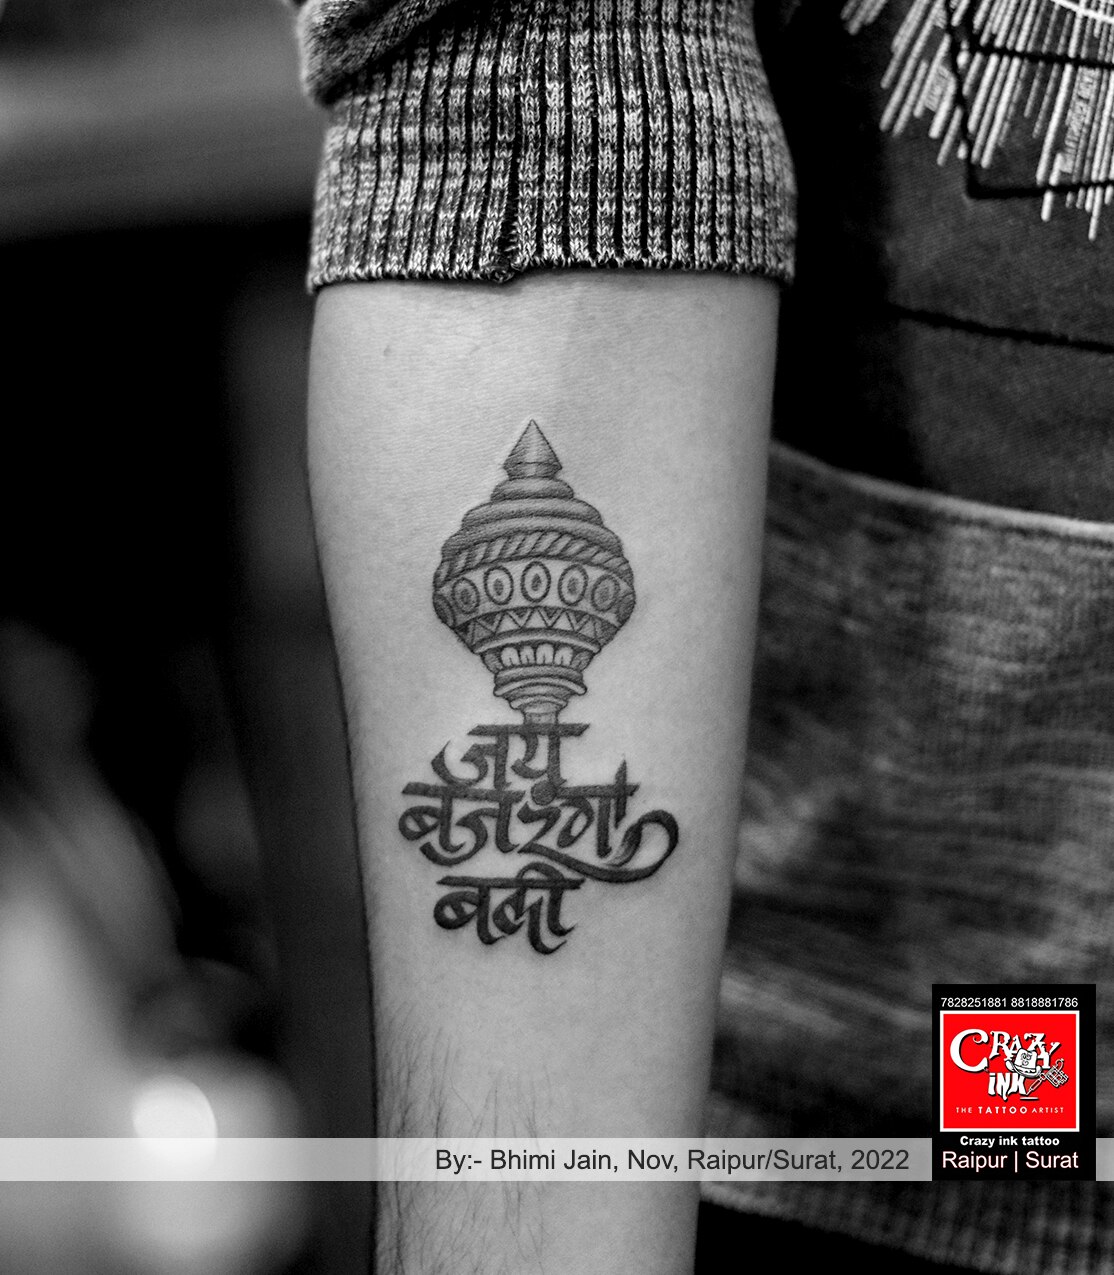 Delhi, want to get inked? Head to the Heartwork Tattoo fest